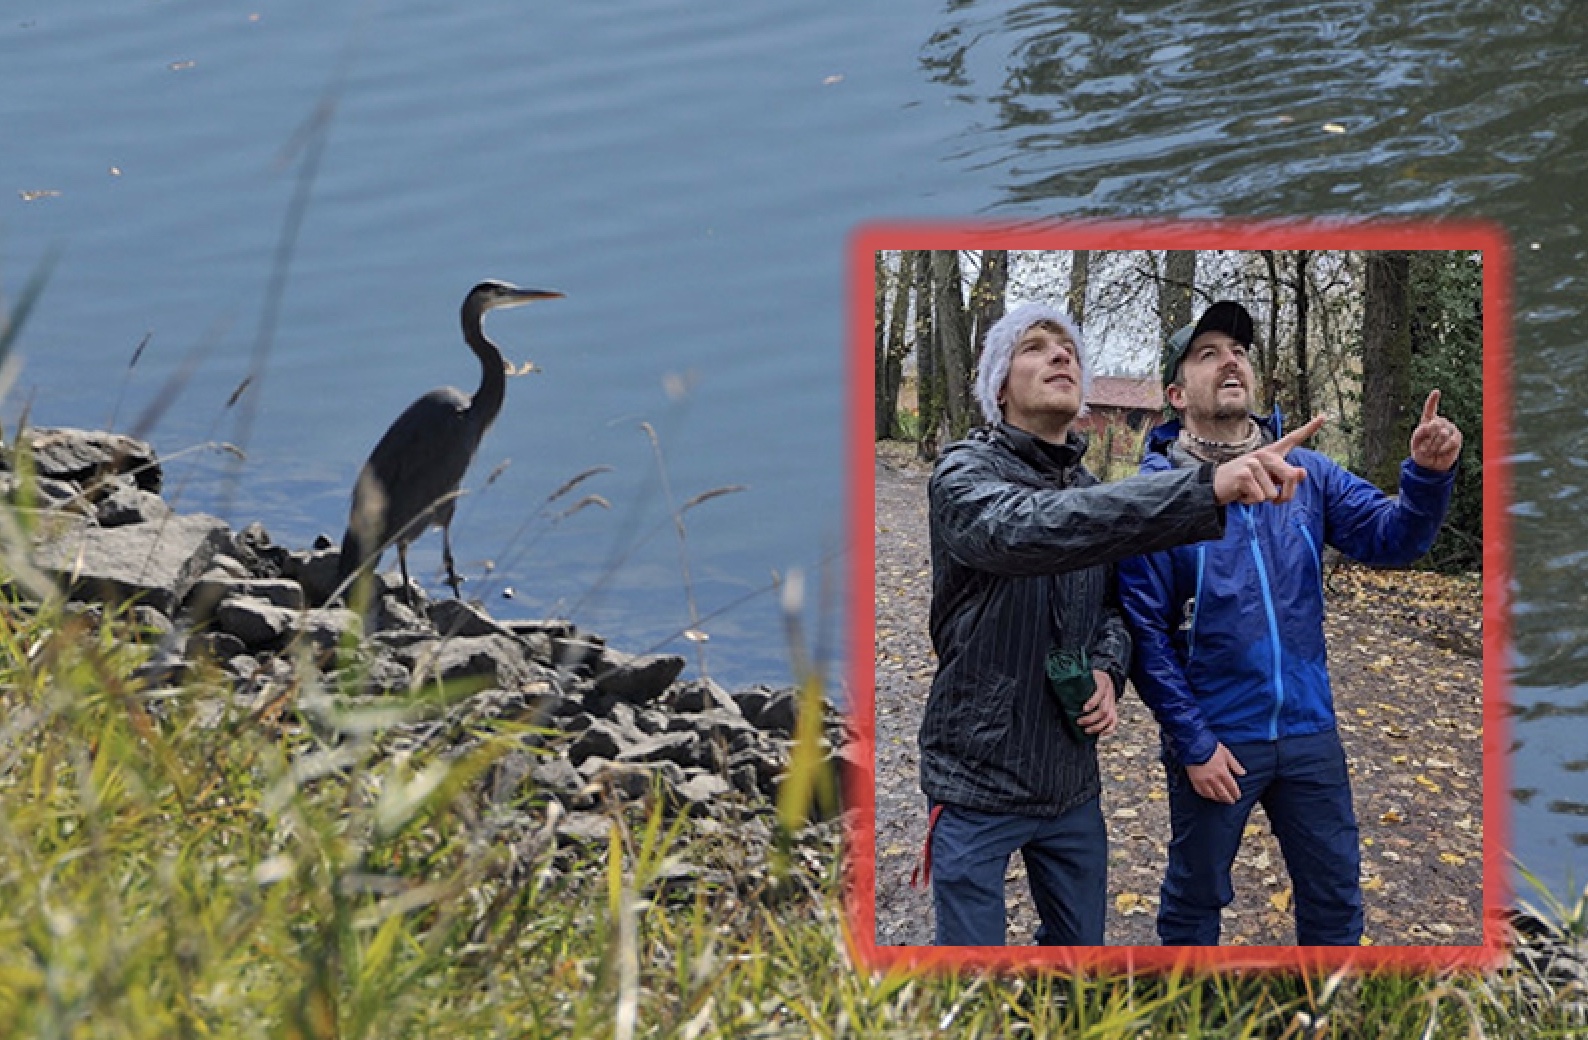 A heron at the side of a river and two men in inset photo looking at the sky.